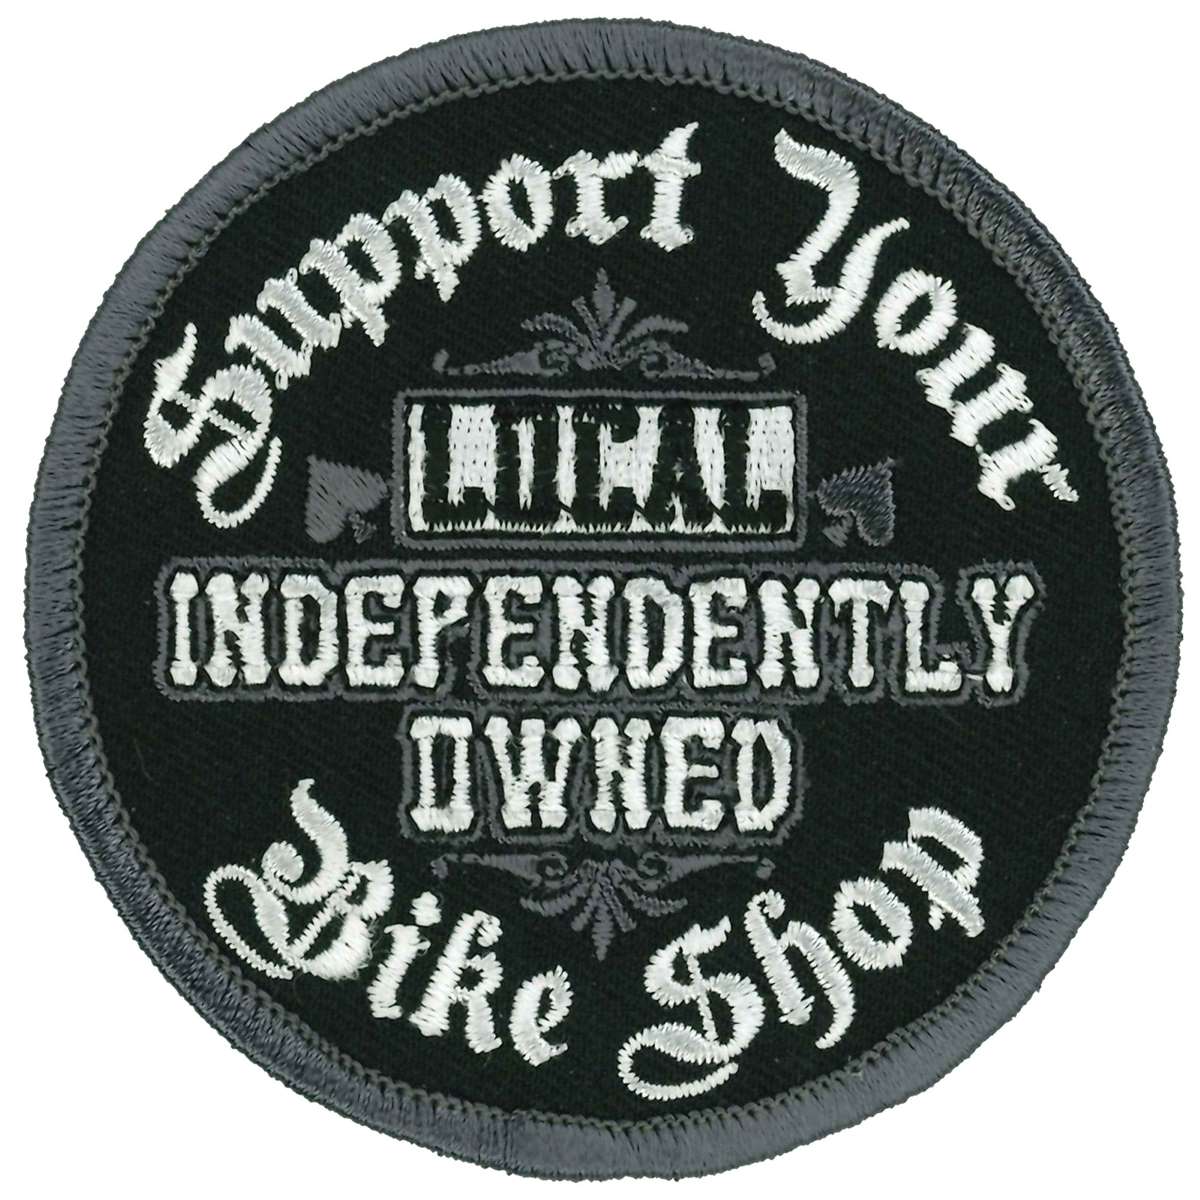 Hot Leathers Support Your Local Bike Shop 3" X 3" Patch PPL9877